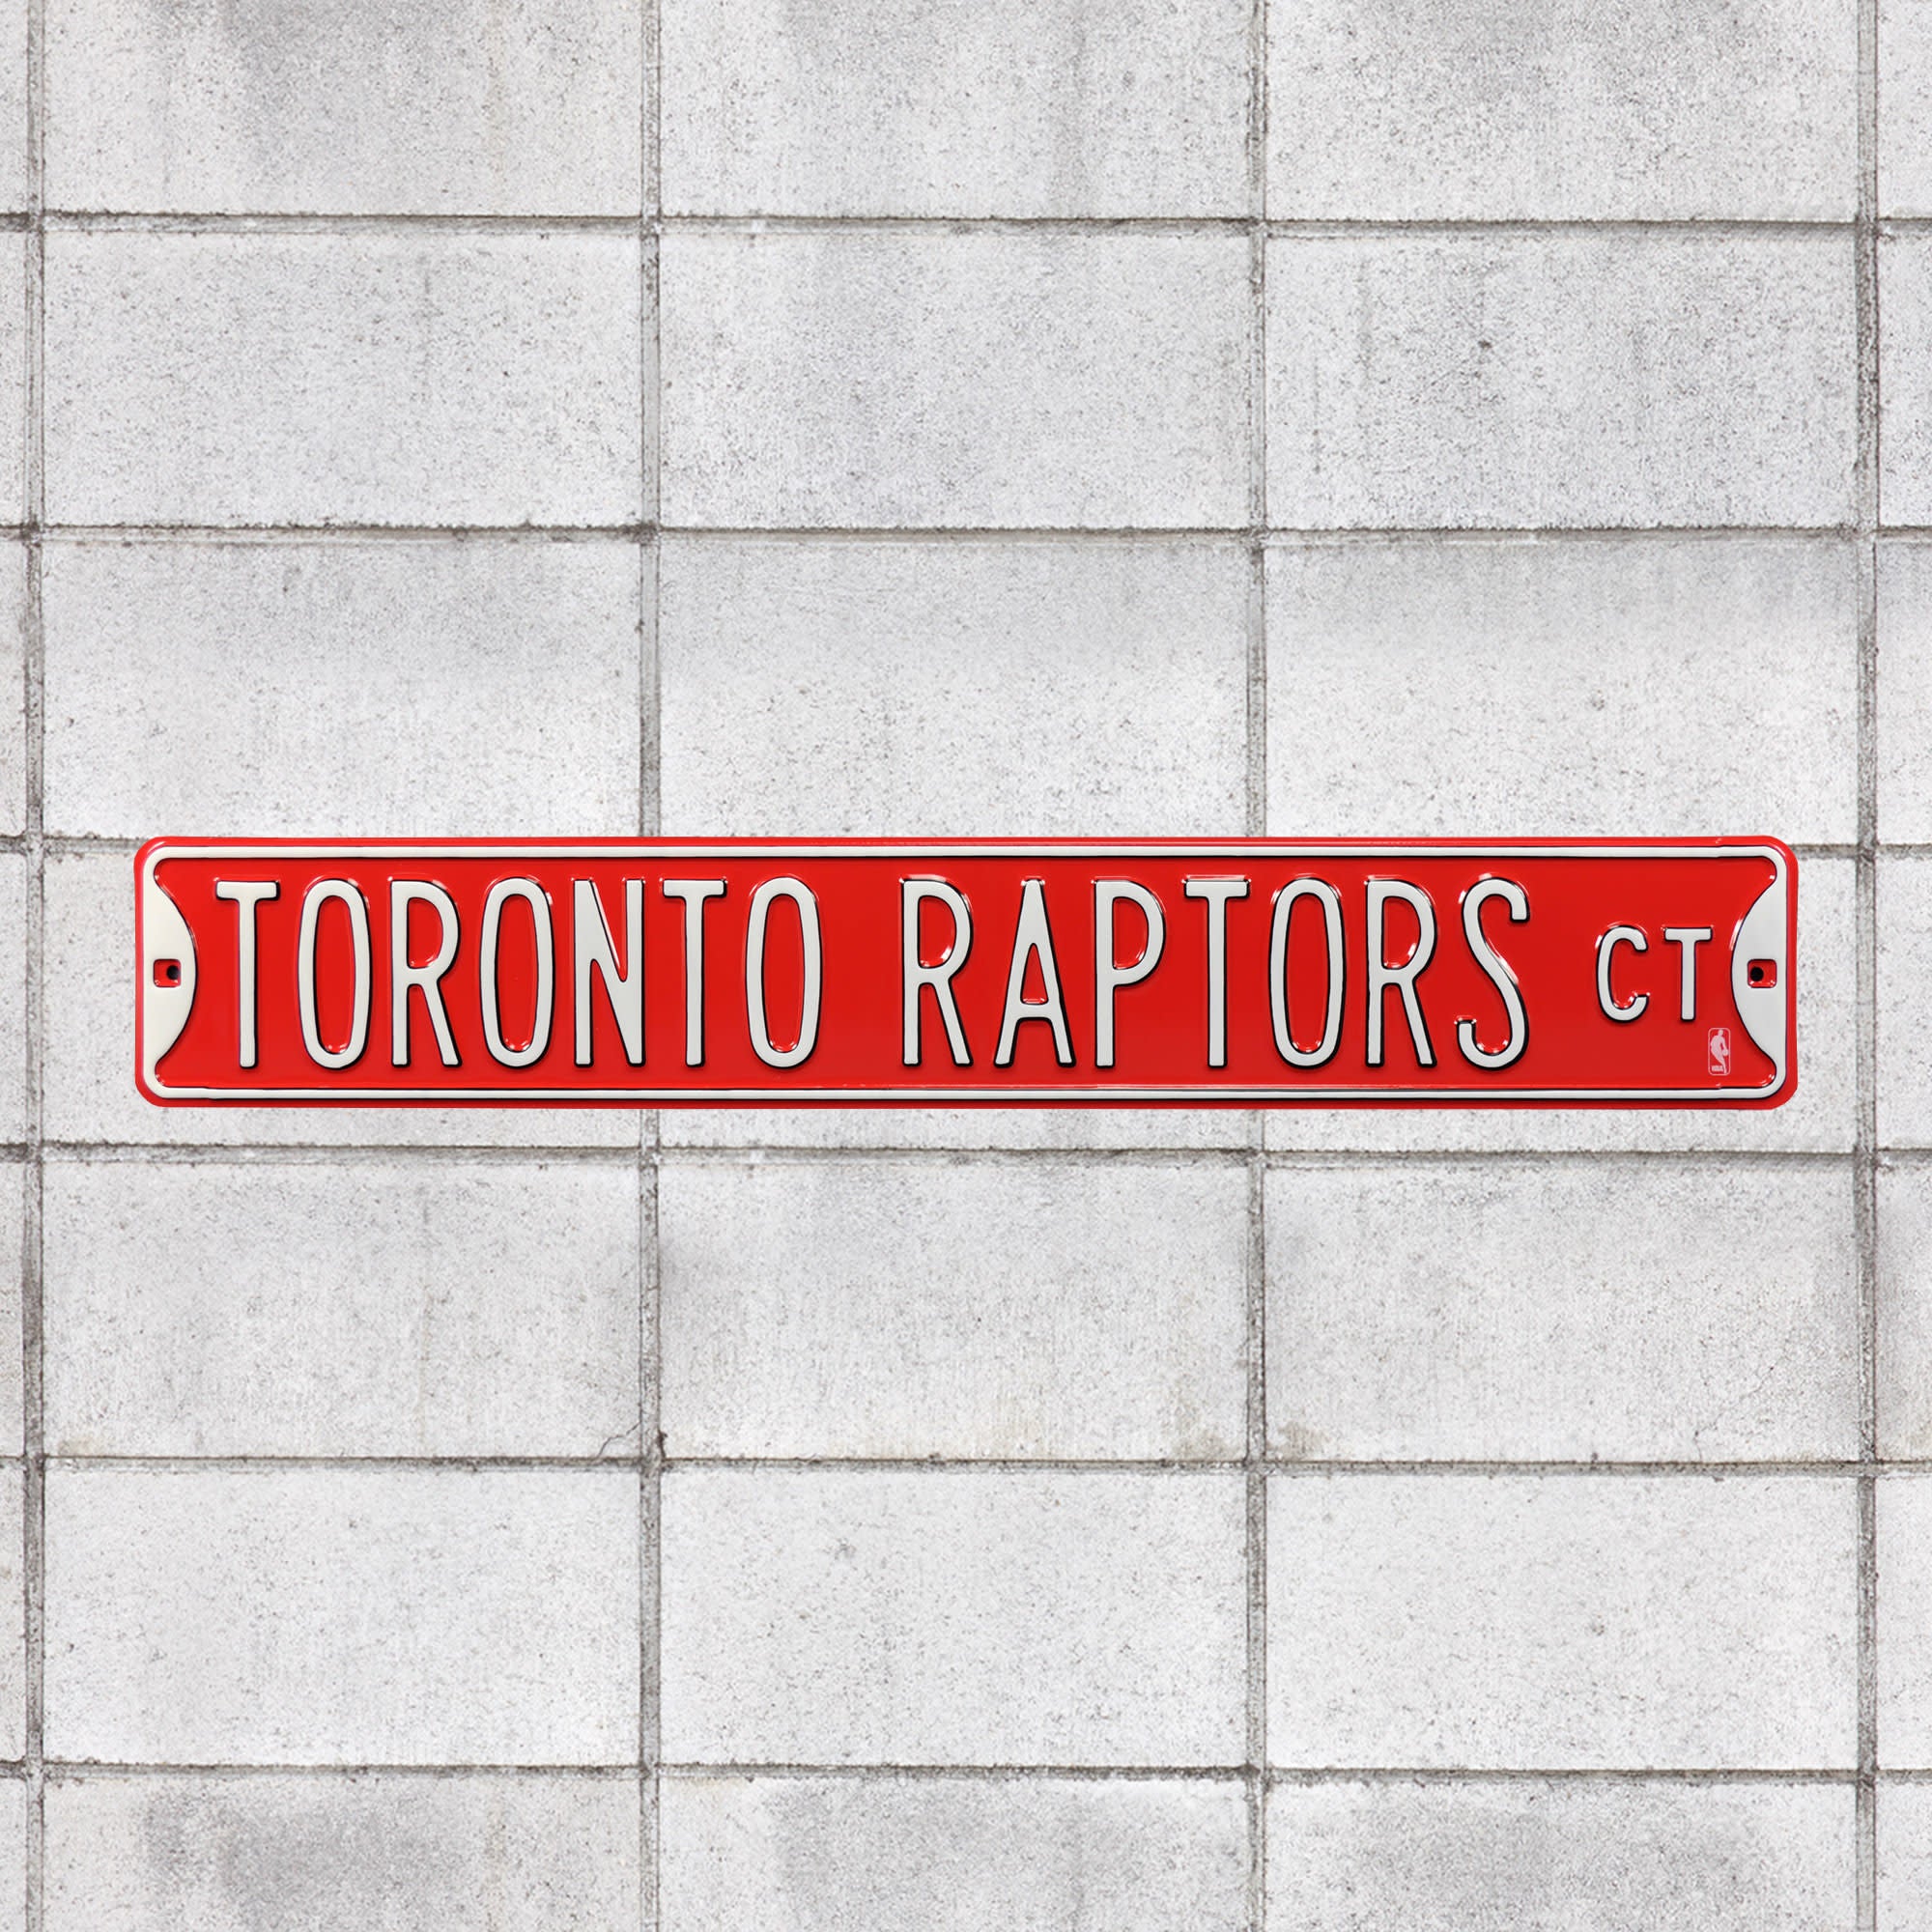 Toronto Raptors: Court - Officially Licensed NBA Metal Street Sign by Fathead | 100% Steel